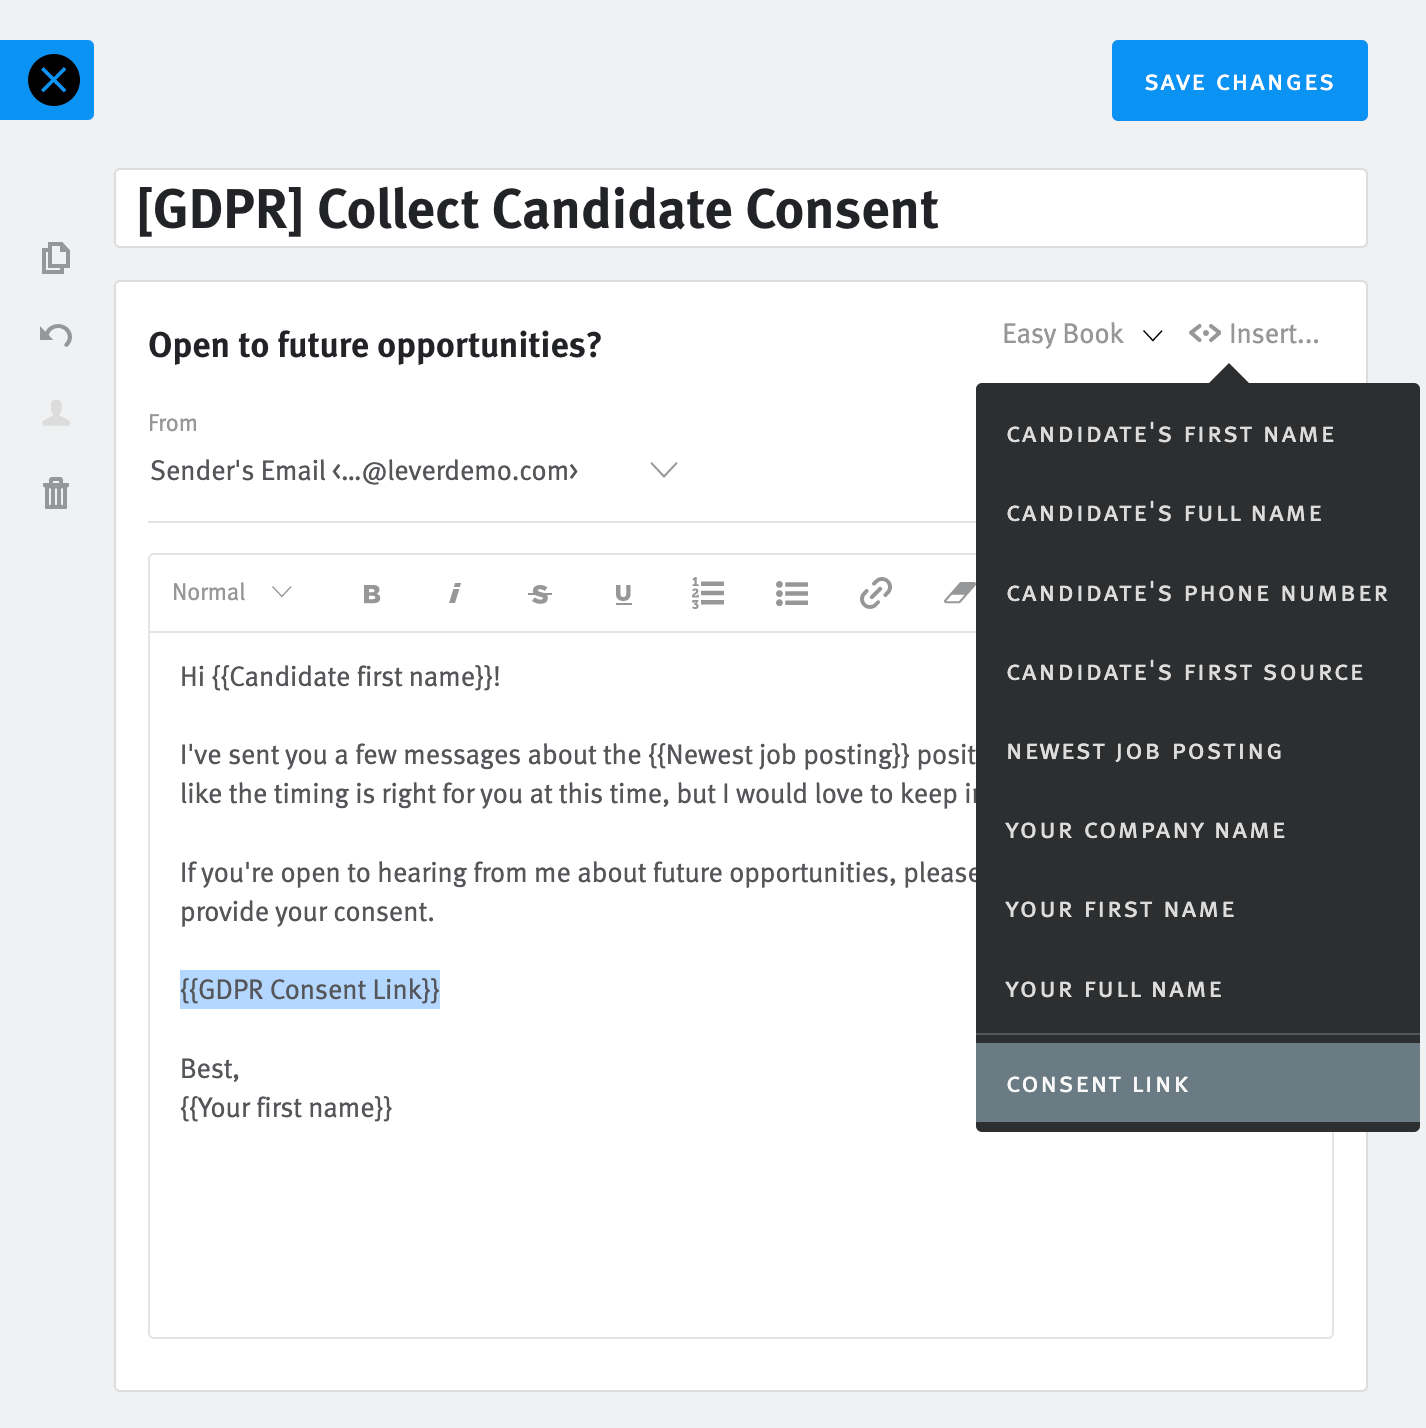 Email template editor with auto-text token menu expanded and consent link option highlighted on hover.